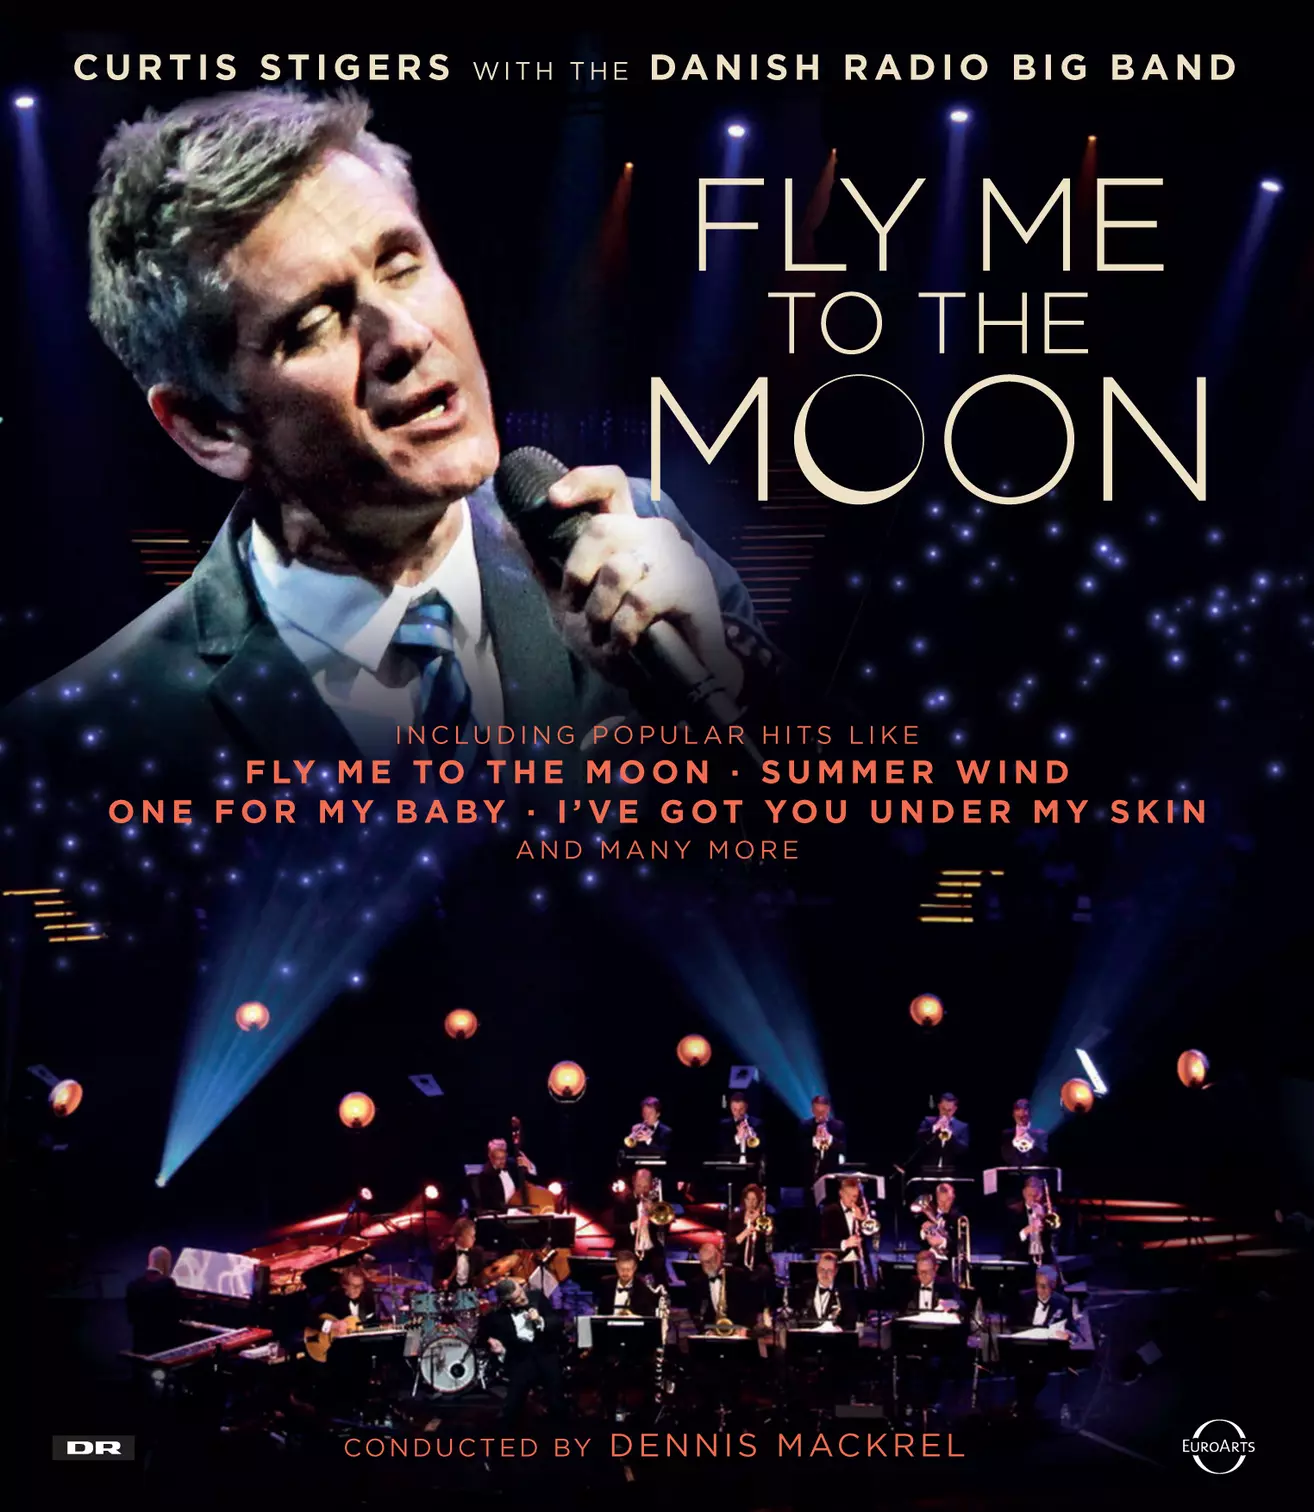 Fly Me To The Moon – Curtis Stigers with the Danish Radio Big Band